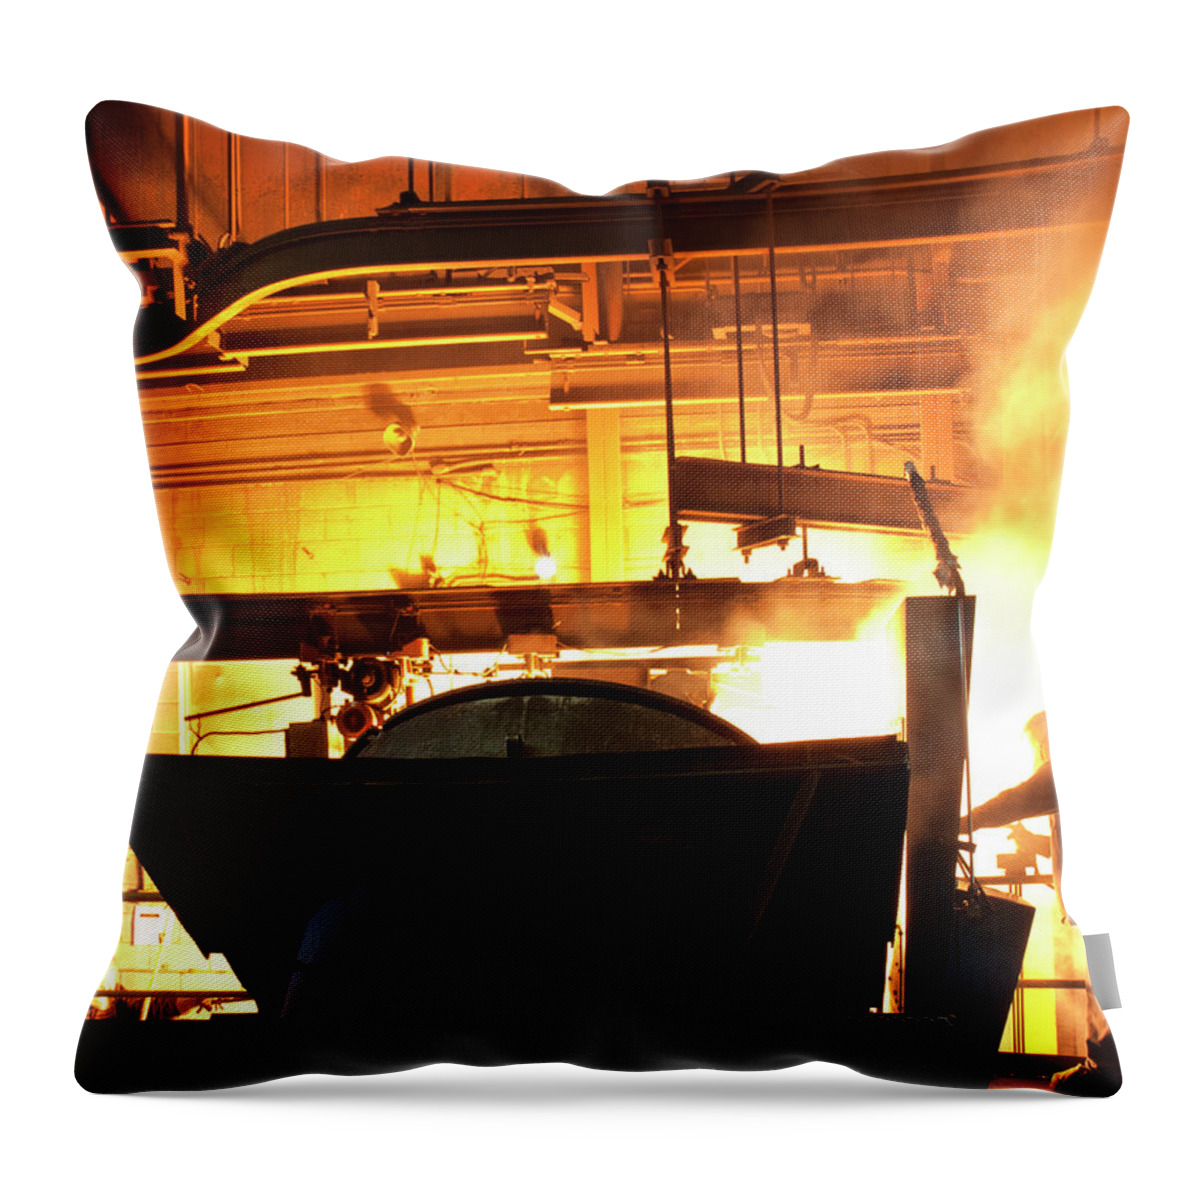 Foundry Throw Pillow featuring the photograph Iron Foundry by Cynthia Dickinson